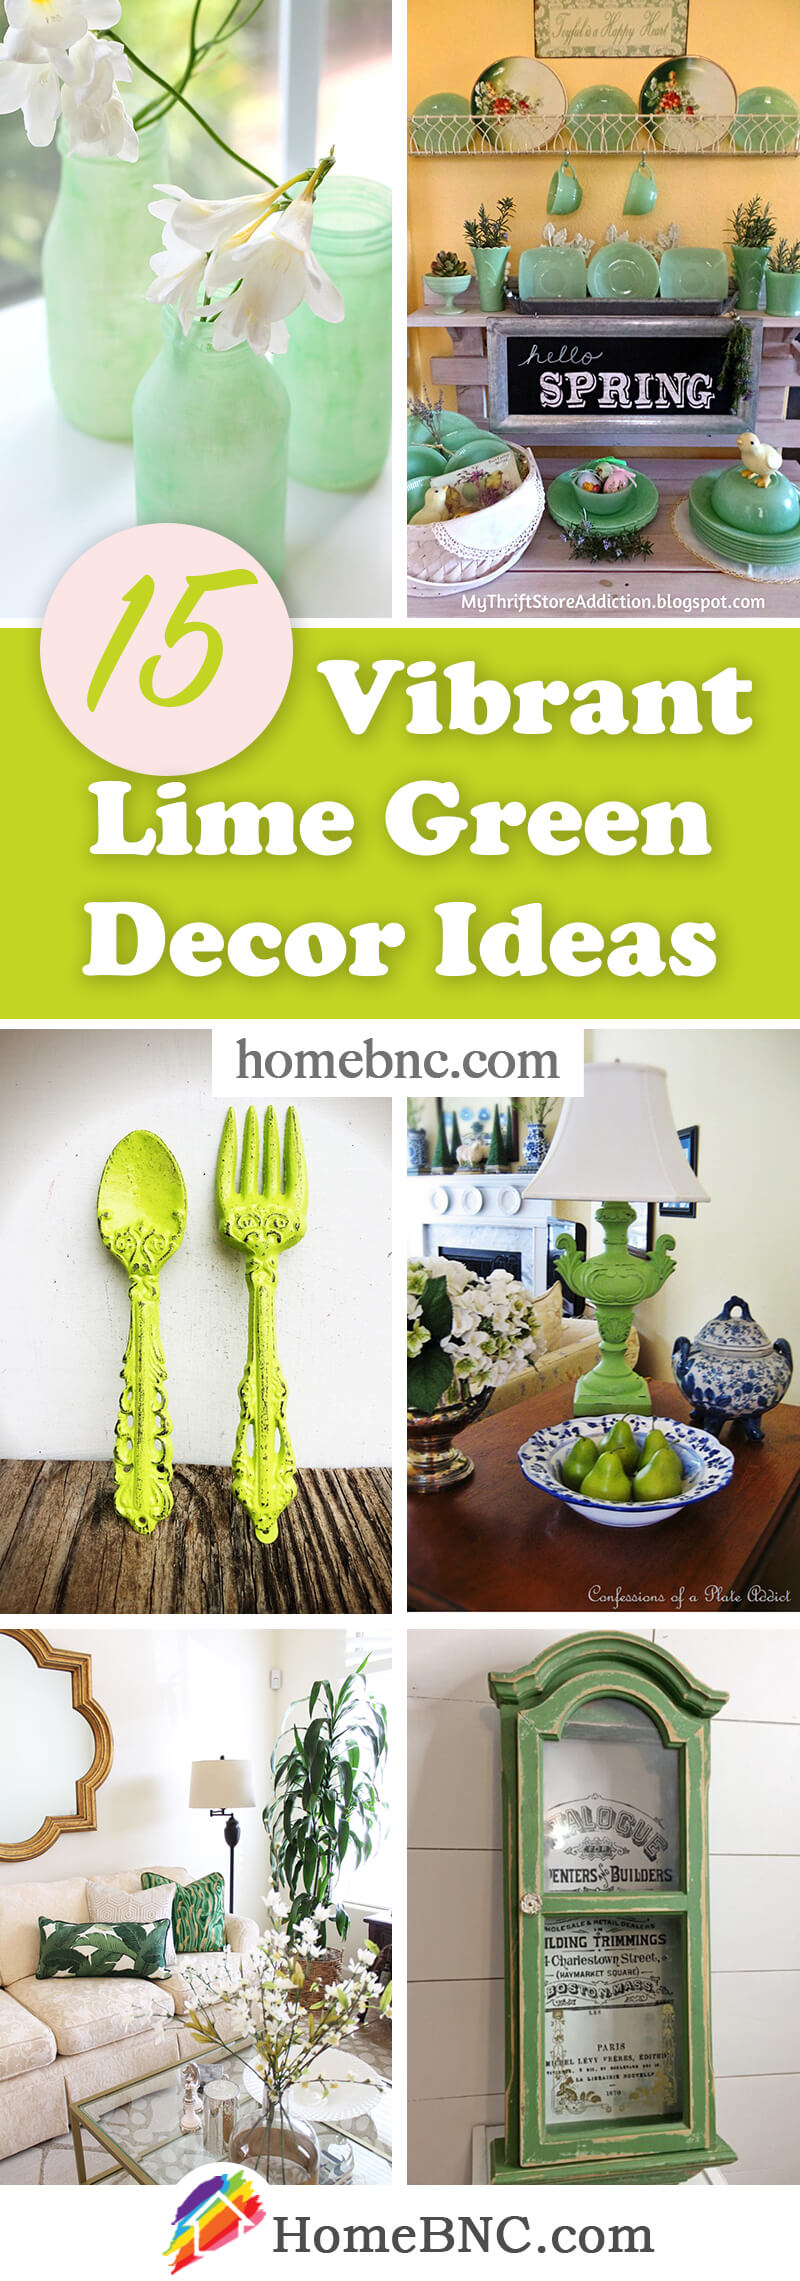 Best Lime Green Home Decor and Design Ideas